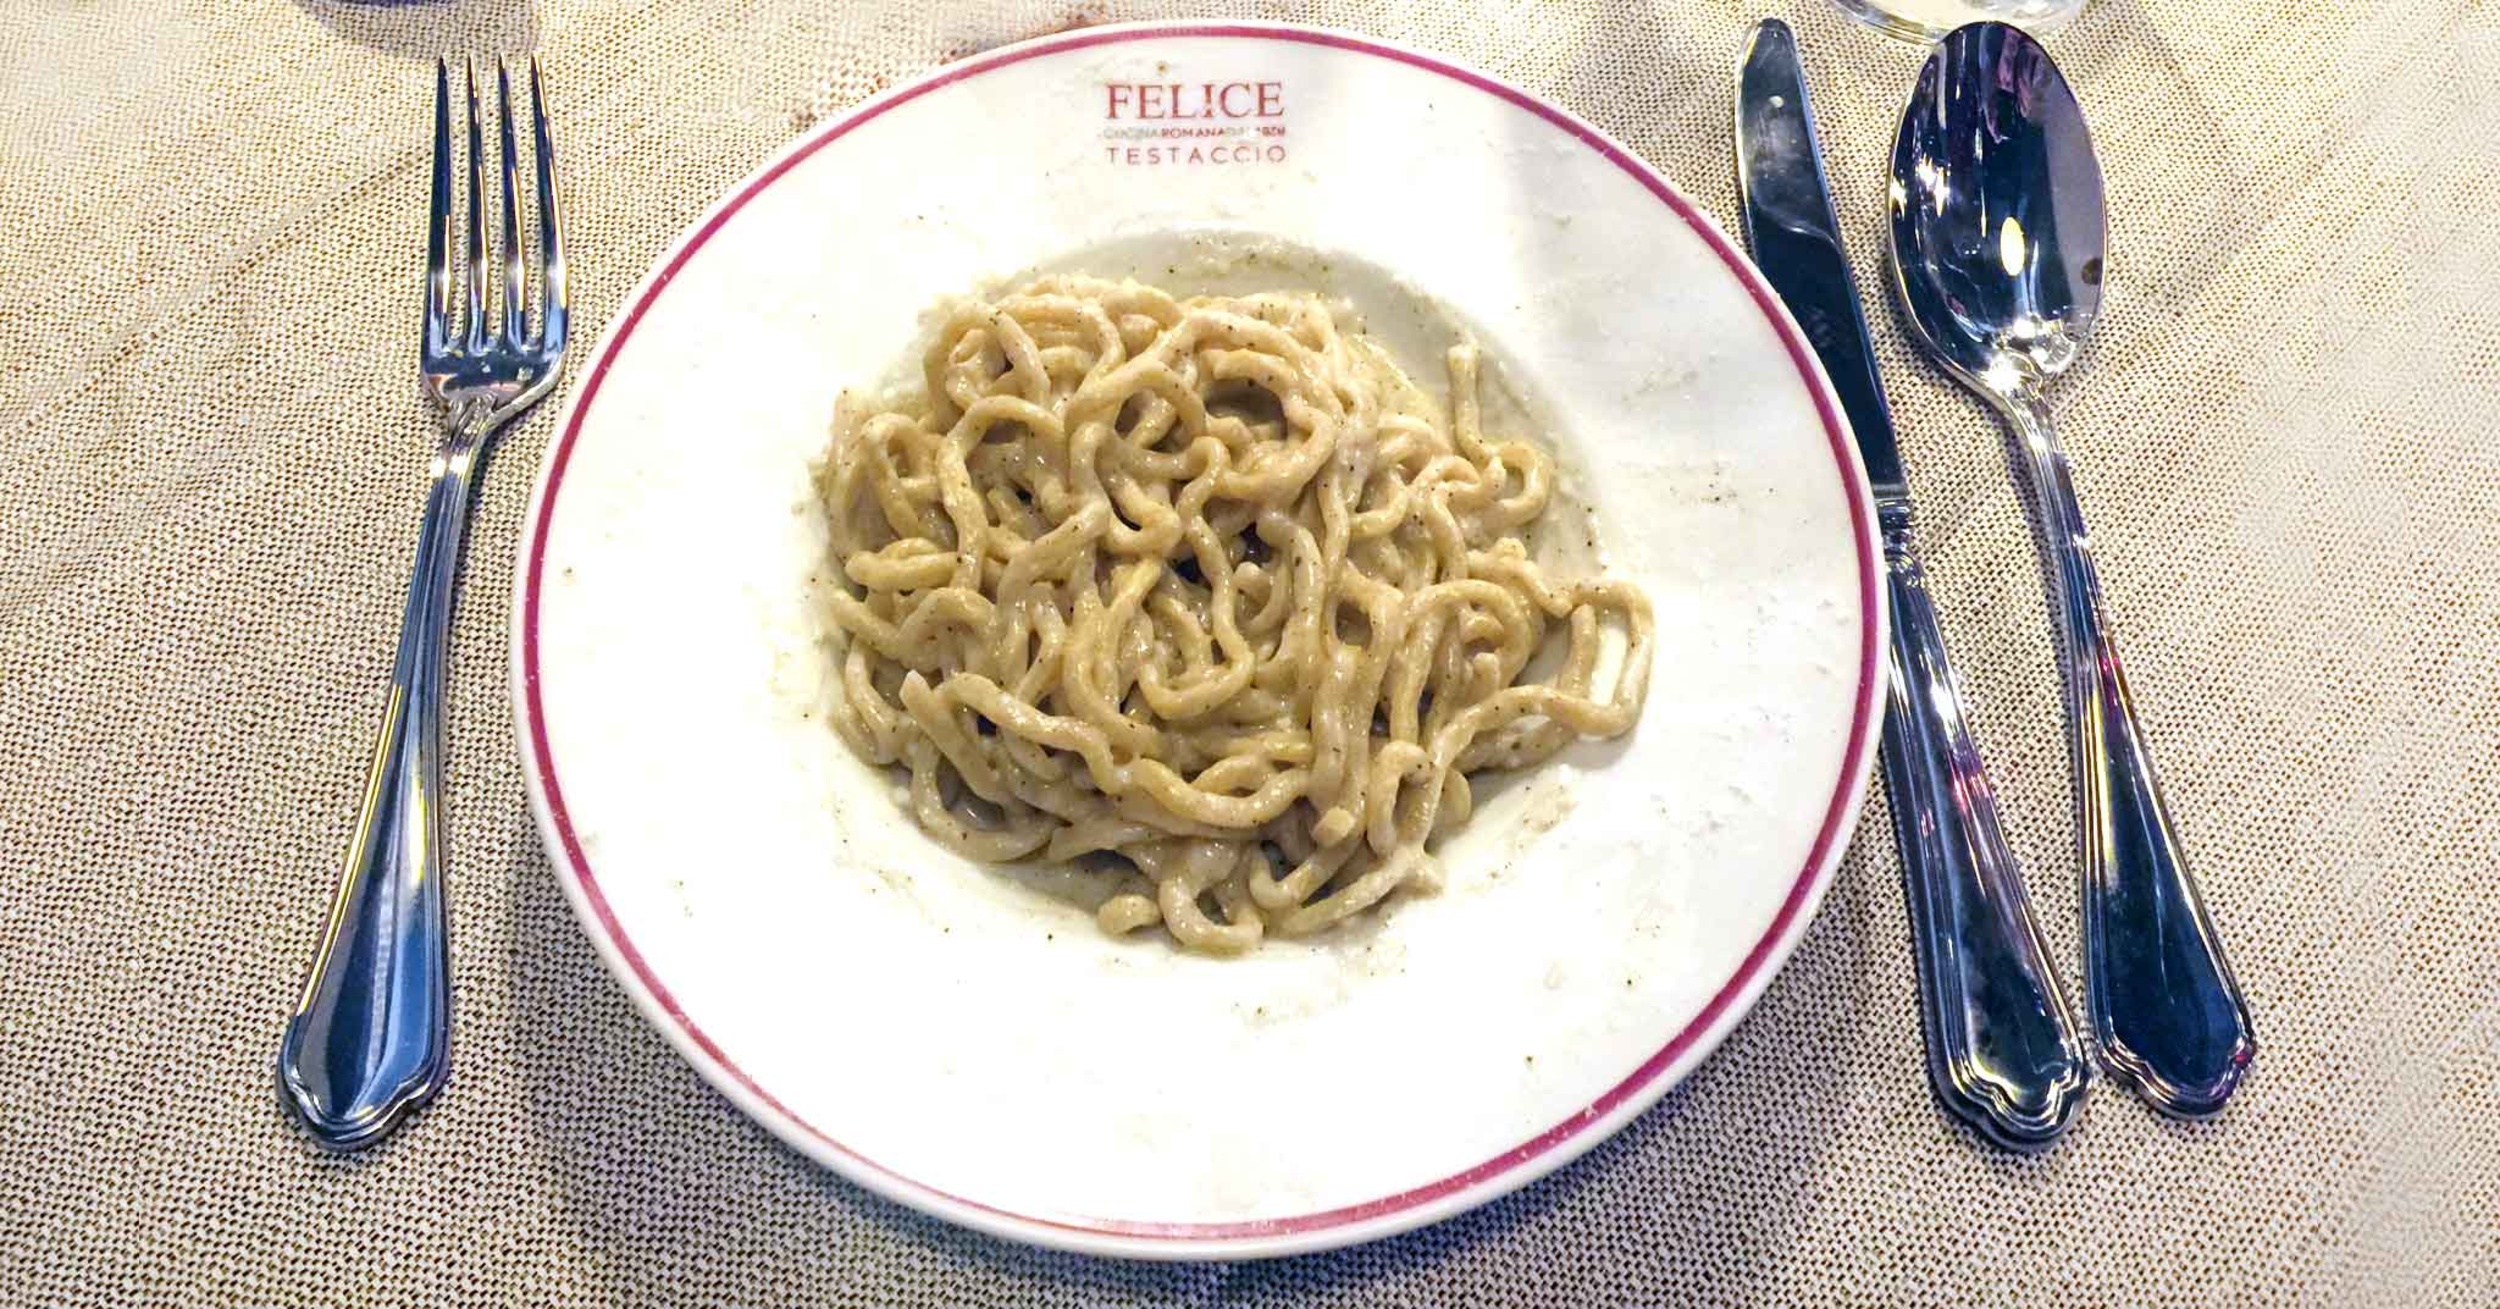 <p>Did we mention Rome might have invented cacio e pepe? Whether the stories are true or not, the city's restaurants all serve their own version of this signature dish. The best place to order one of these plates is at Felice a Testaccio, which prepares the pasta in front of you and has graciously located itself outside of town. You're going to need a long walk after this one. </p><p>You may also like: <a href='https://www.yardbarker.com/lifestyle/articles/20_slow_cooker_recipes_with_six_ingredients_or_fewer_110823/s1__39117846'>20 slow-cooker recipes with six ingredients or fewer</a></p>